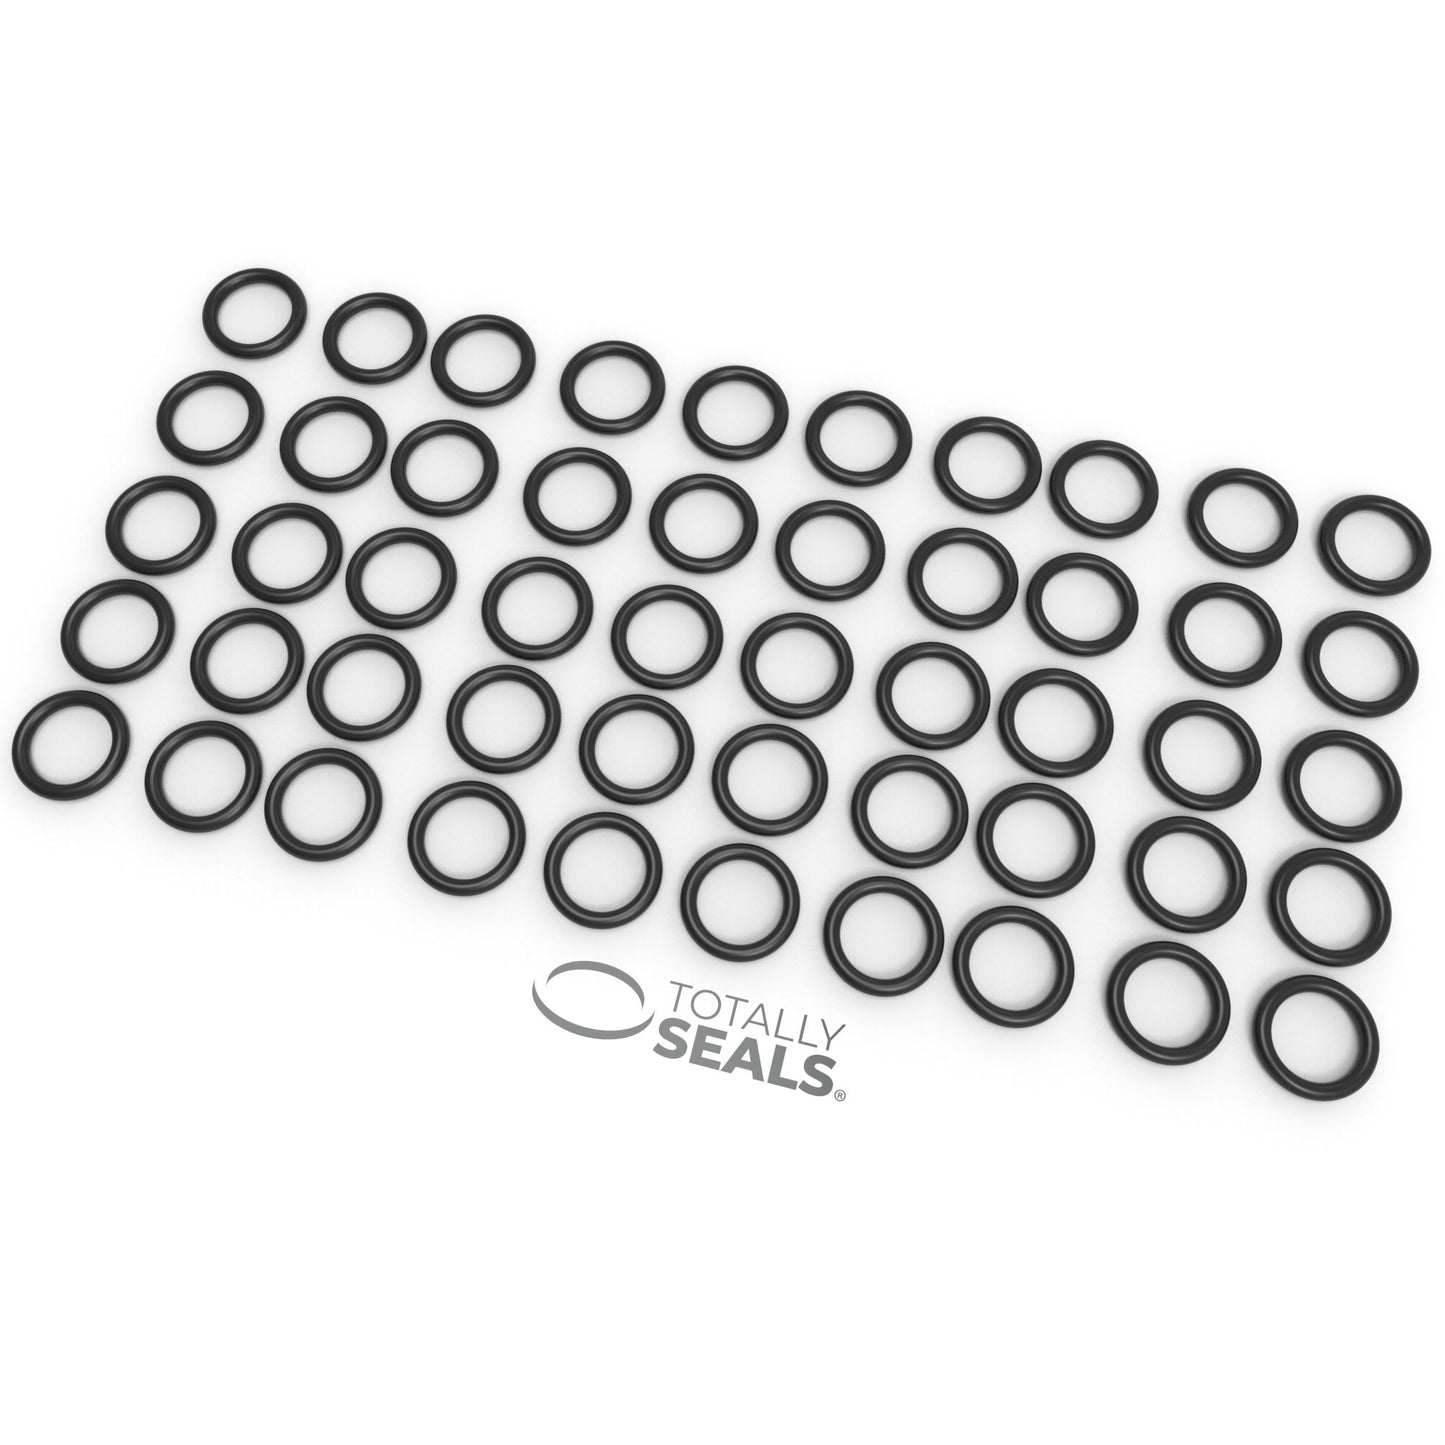 24mm x 4mm (32mm OD) Nitrile O-Rings - Totally Seals®